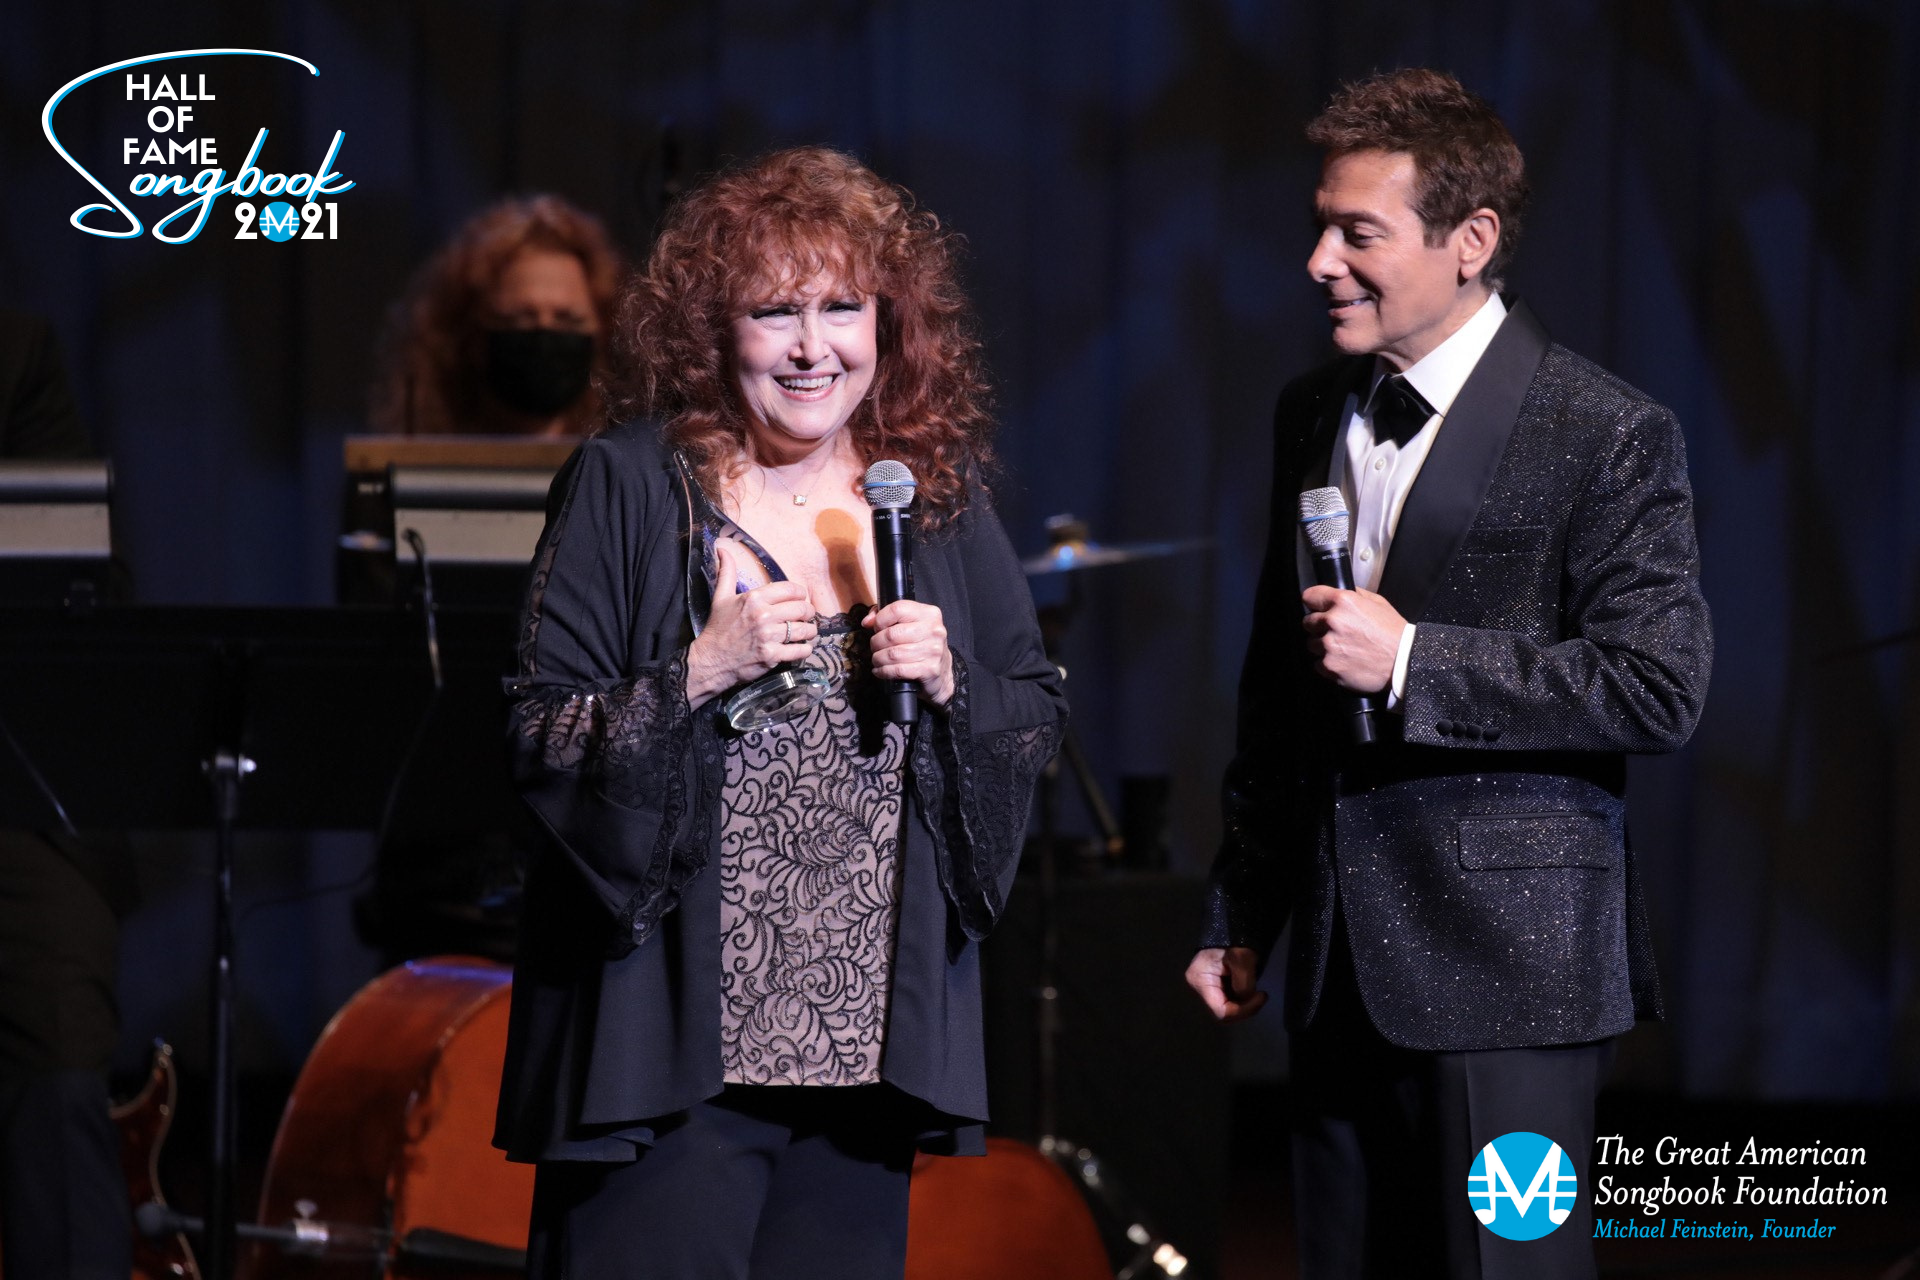 Melissa Manchester smiles as she accepts the New Standard Award from Michael Feinstein